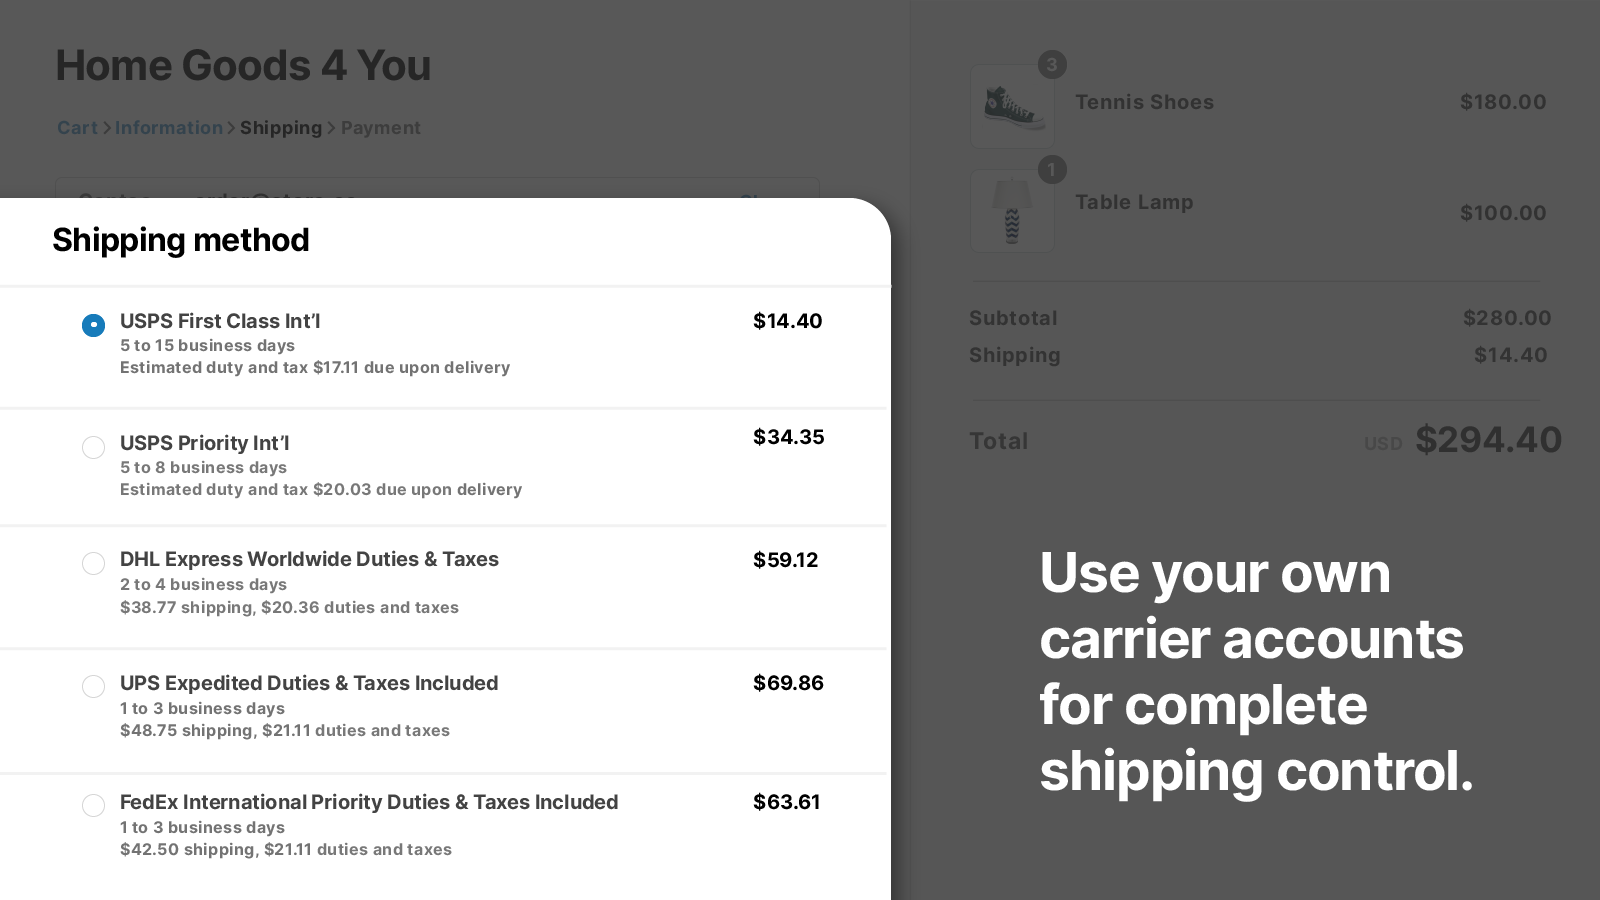 Tie into your own carrier accounts using your own shipping rates